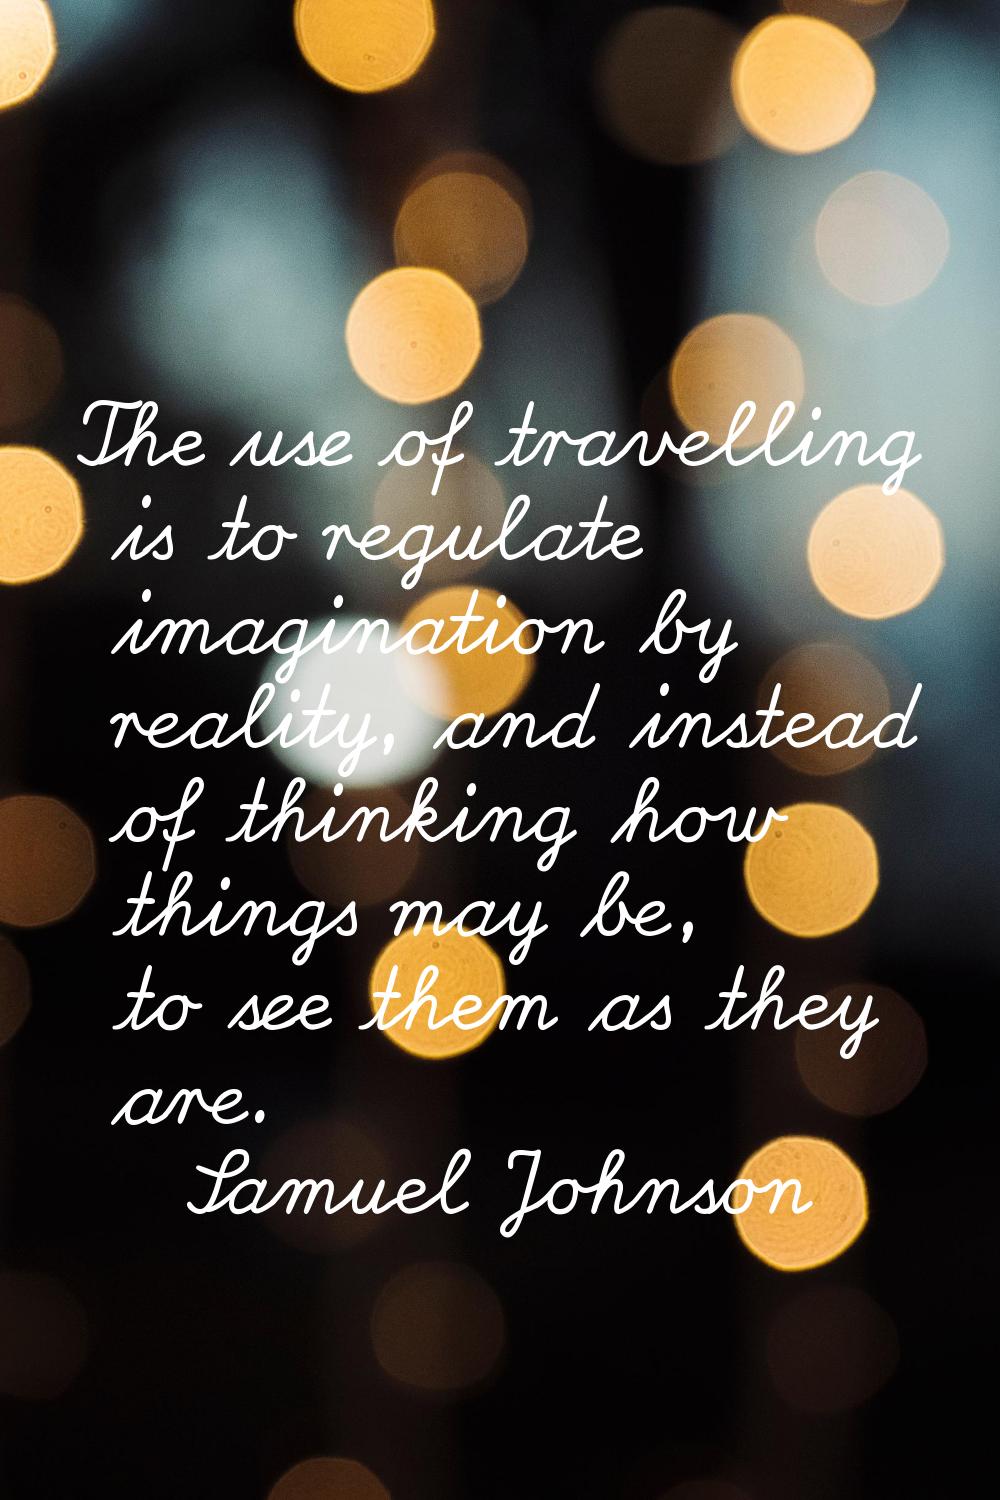 The use of travelling is to regulate imagination by reality, and instead of thinking how things may